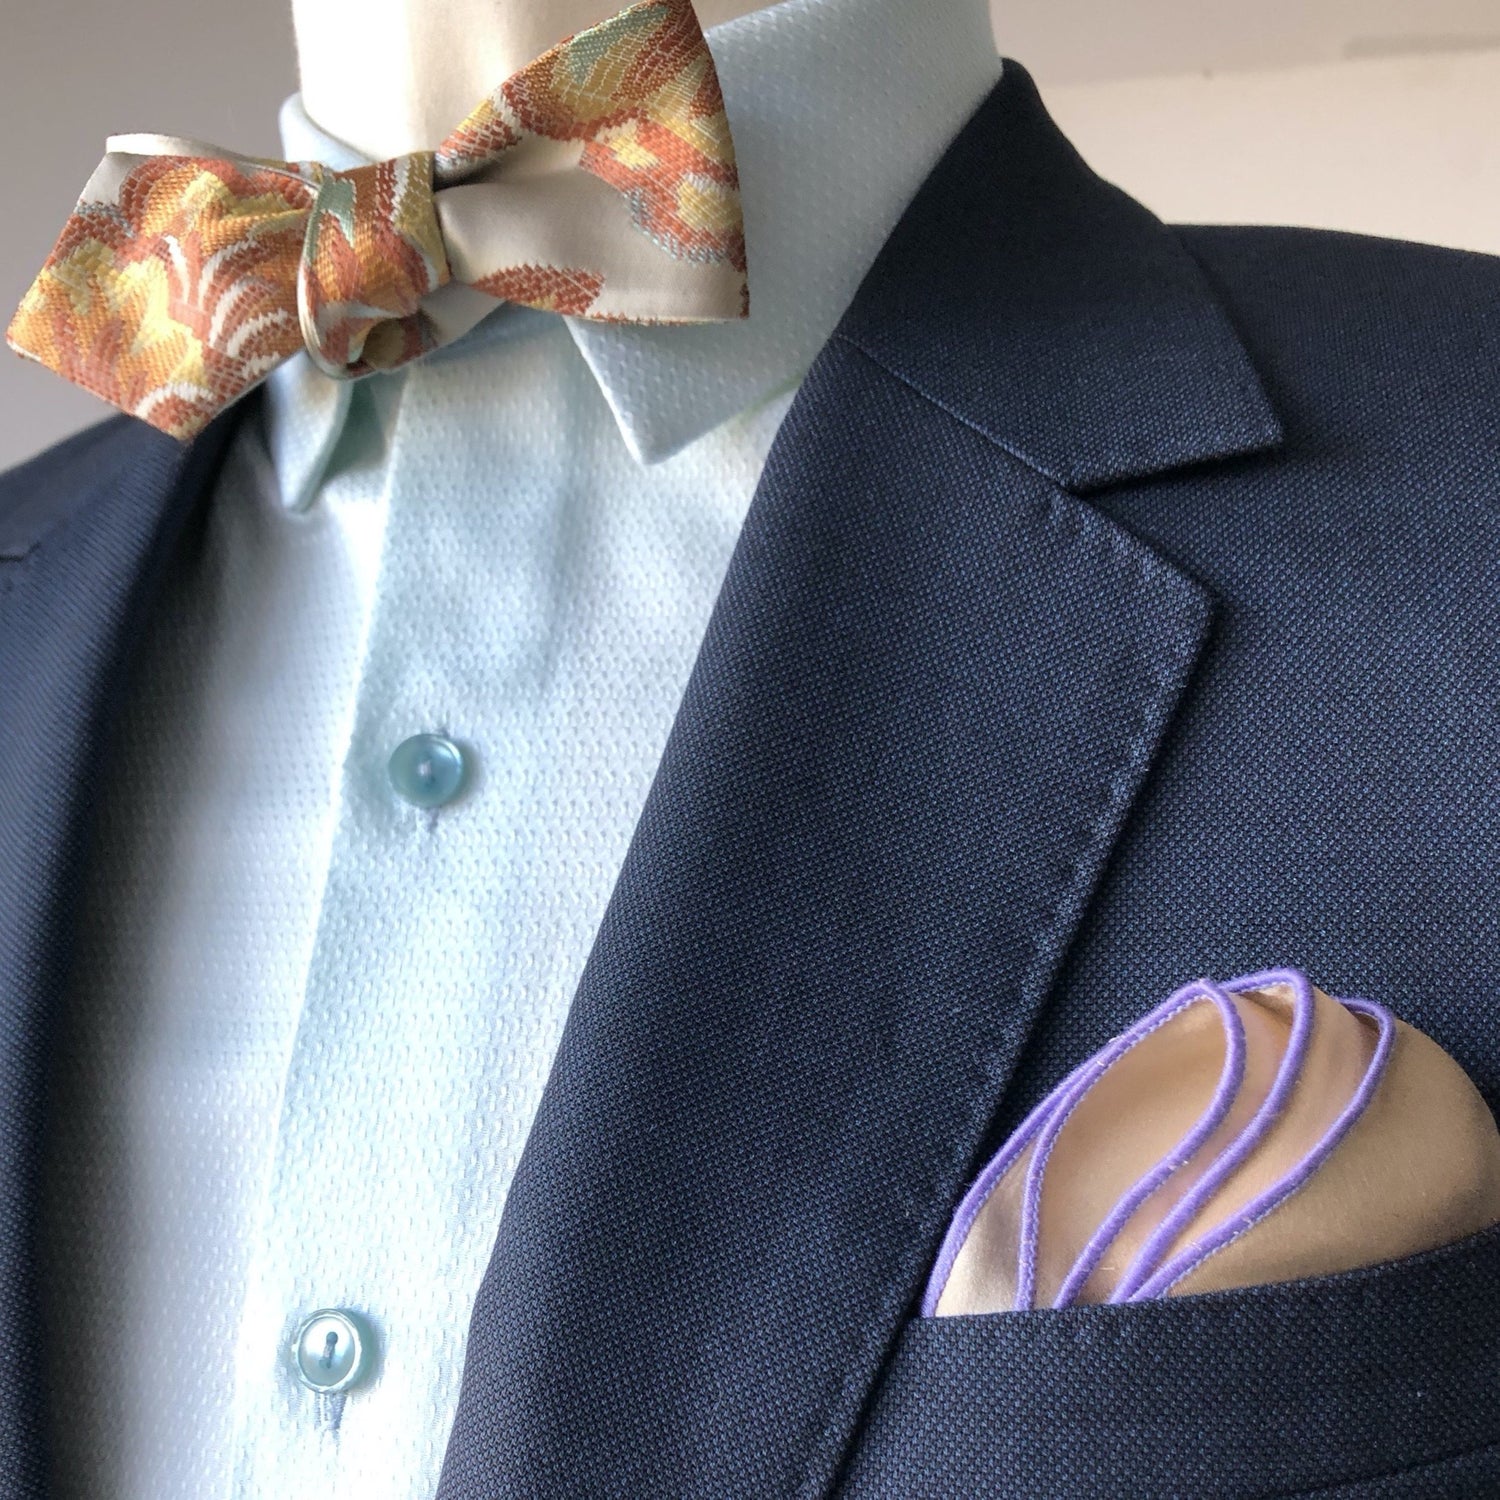 Blush Gold and Pewter Diamond Tip Bow Tie with Pewter Pocket Square by German Valdivia 